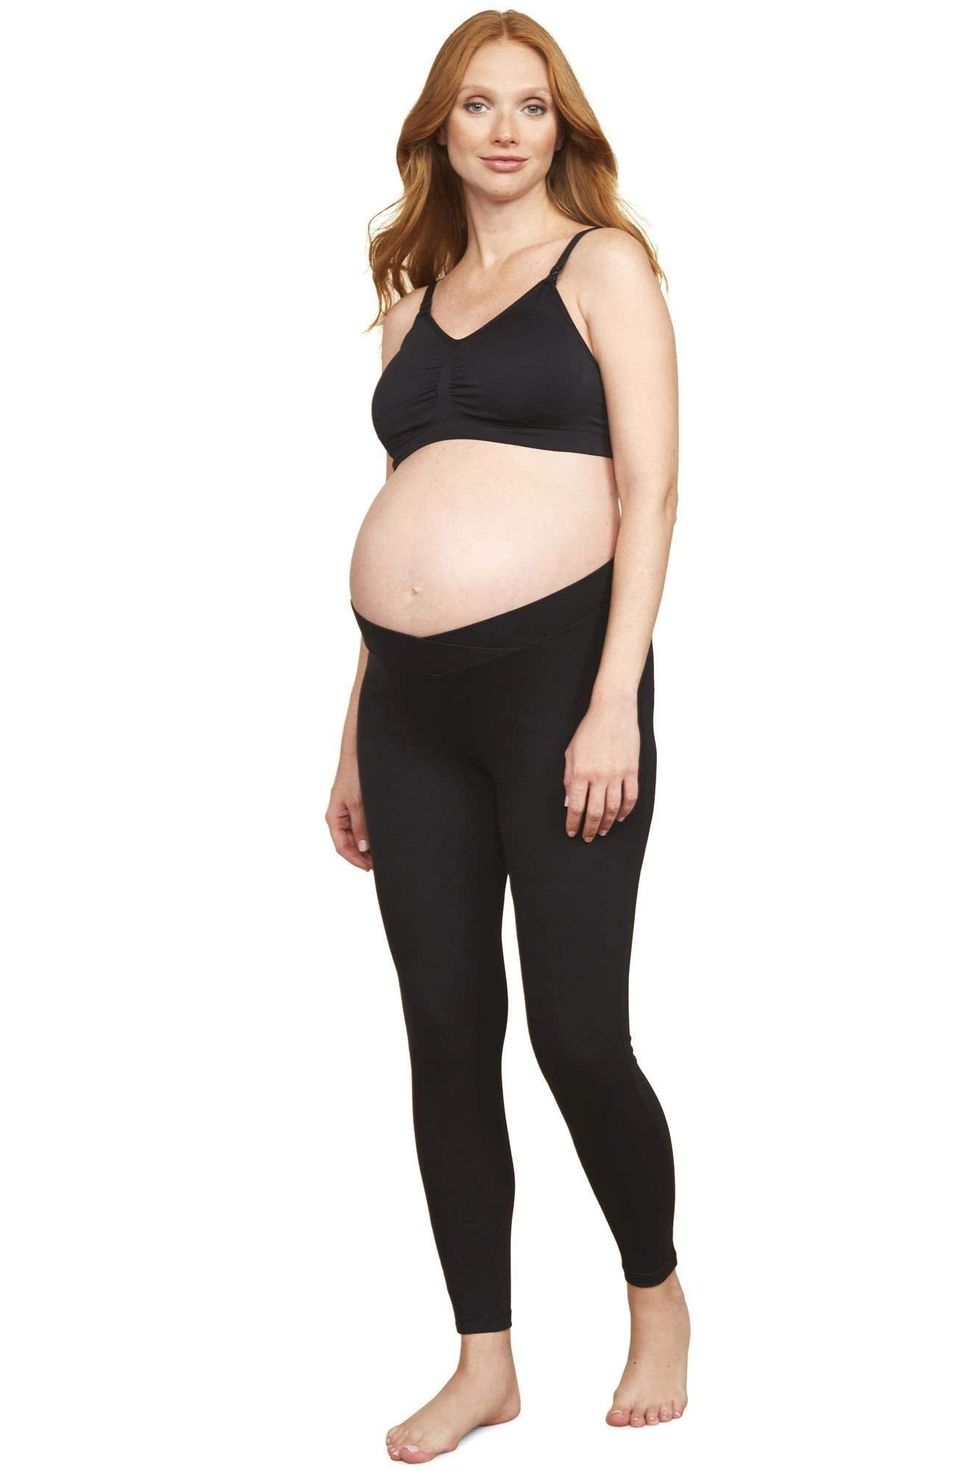 7/8 Maternity Leggings with Pockets in Black – emamaco